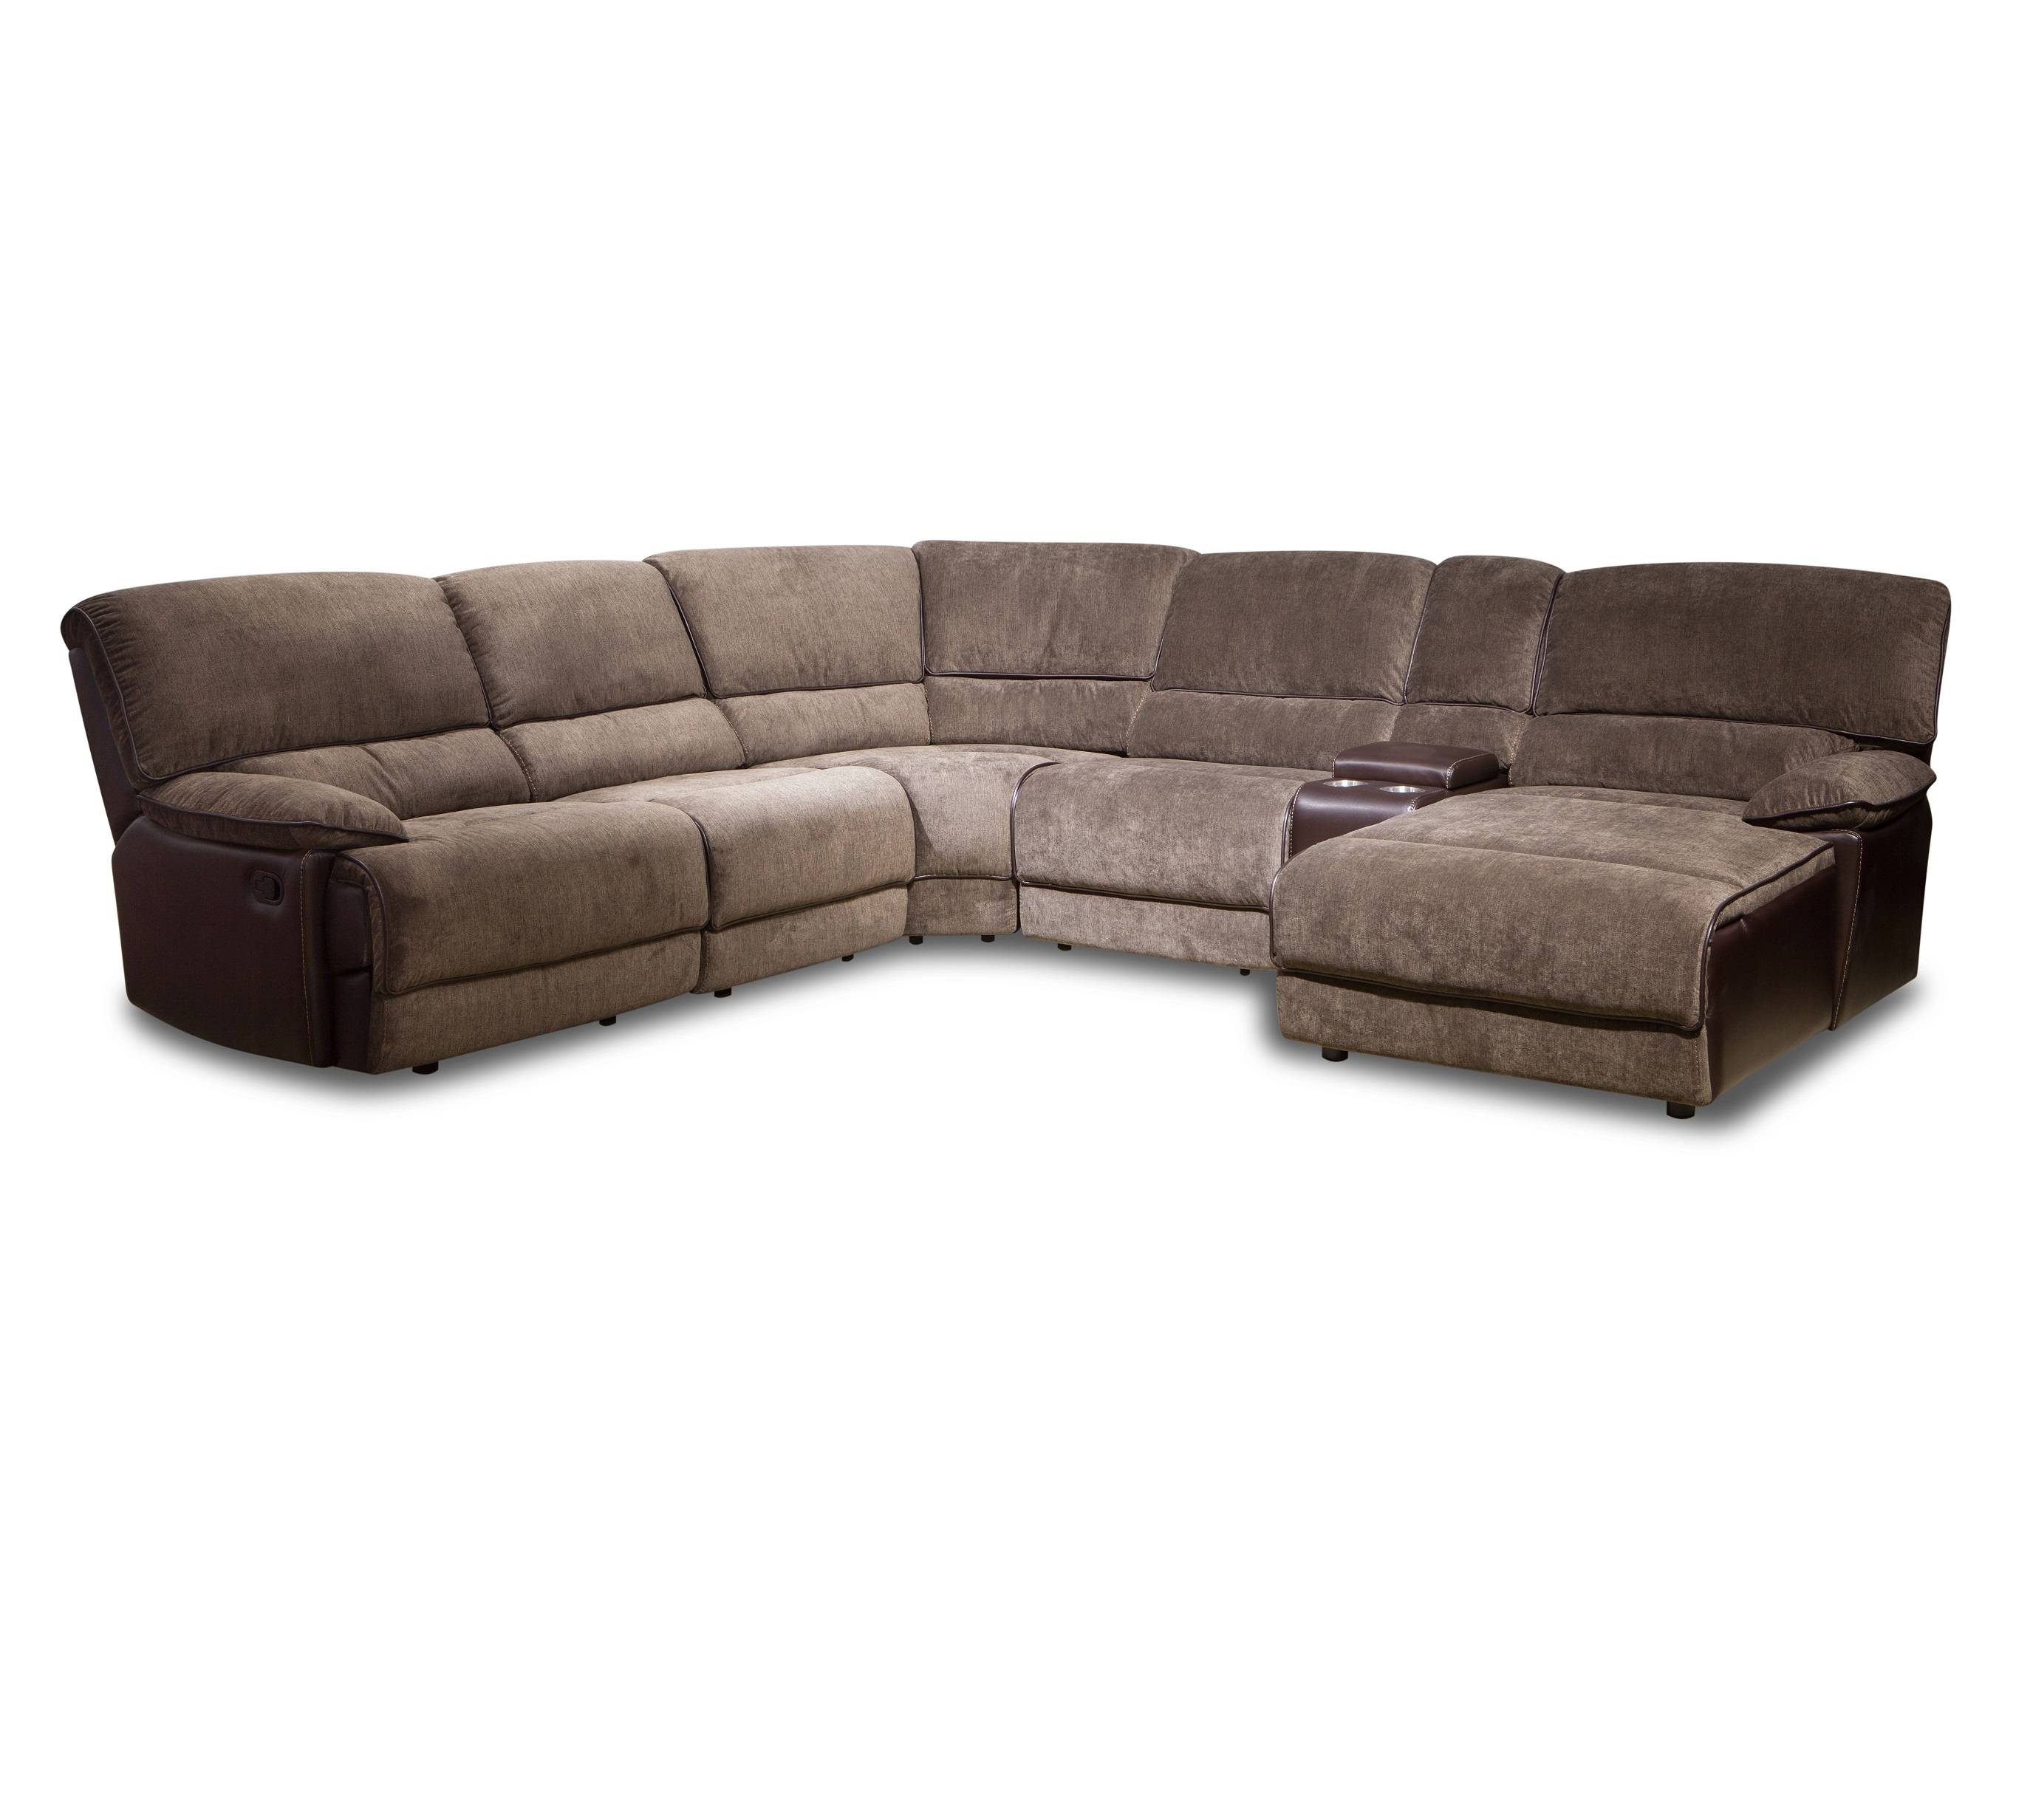 Luxury living room furniture sofa fabric sectional sofa with chaise